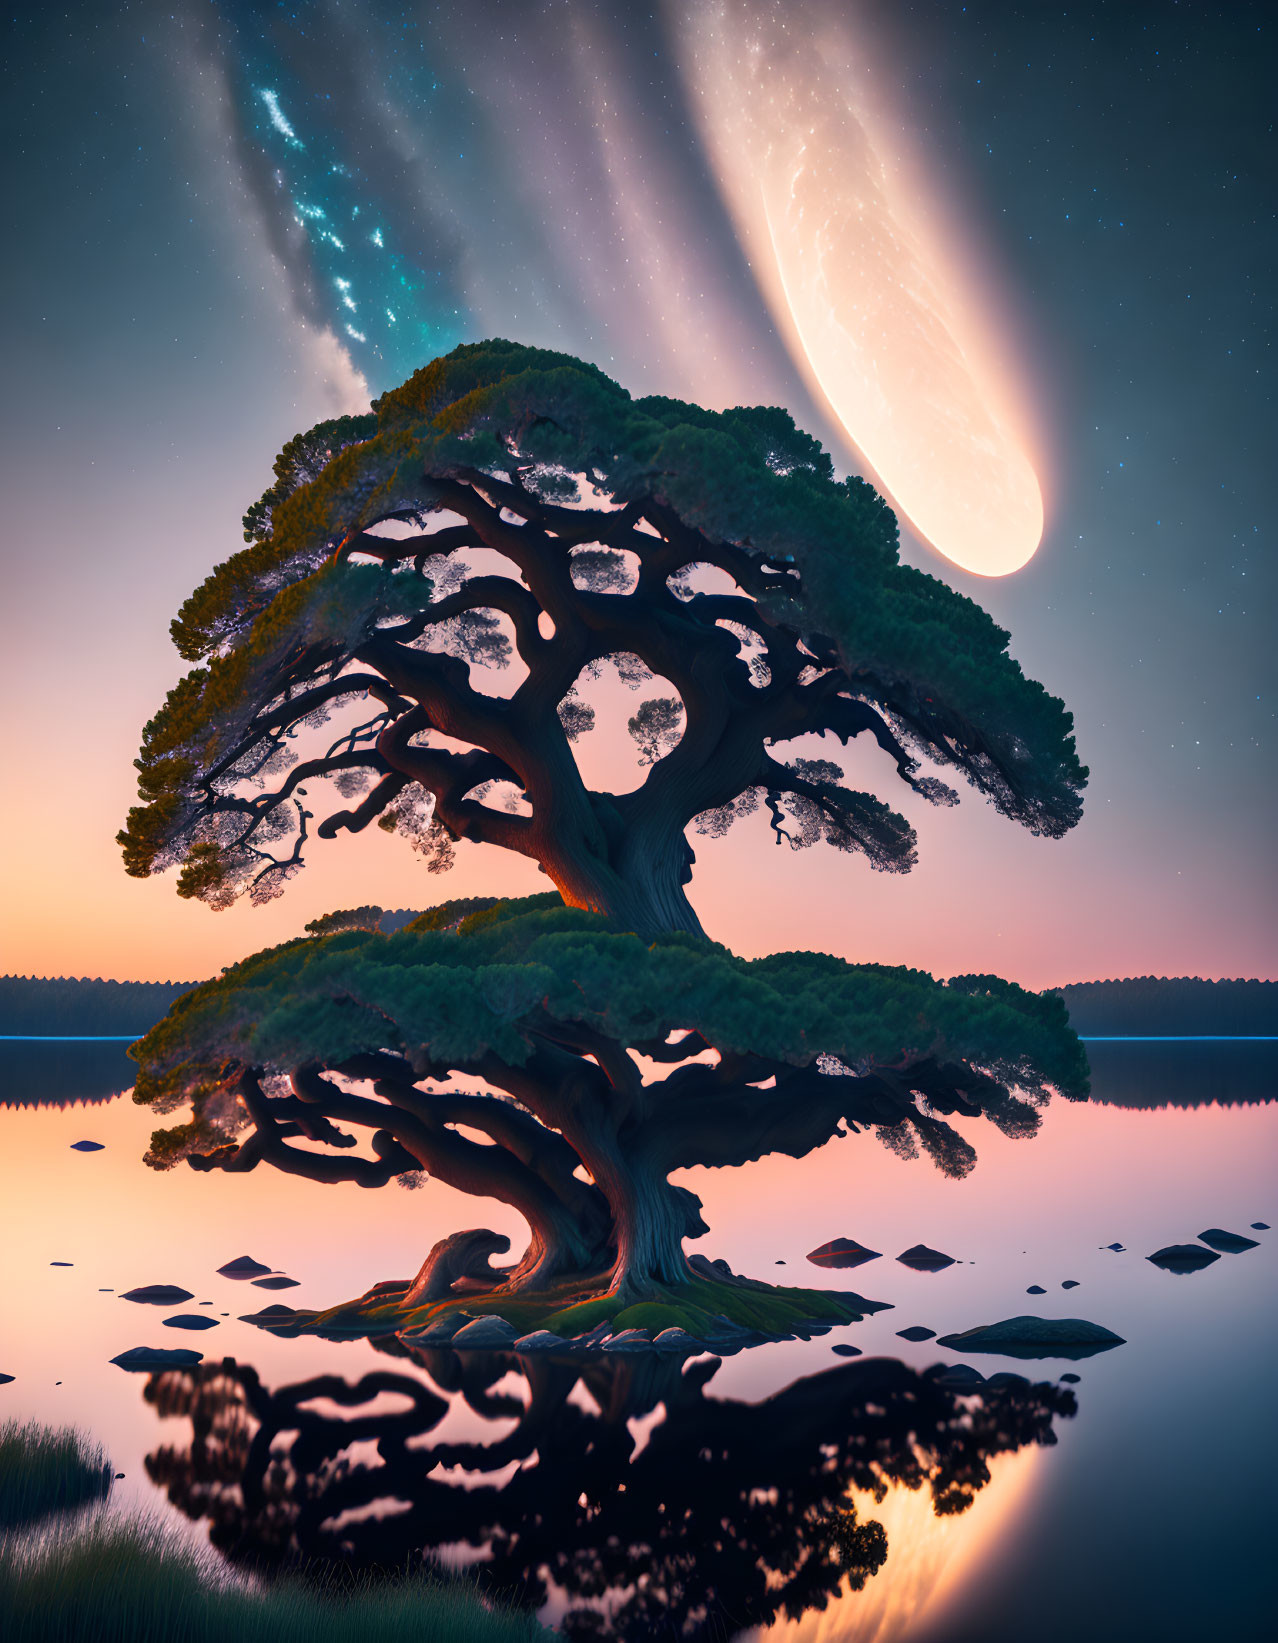 Majestic bonsai tree under twilight sky with comet reflection in water